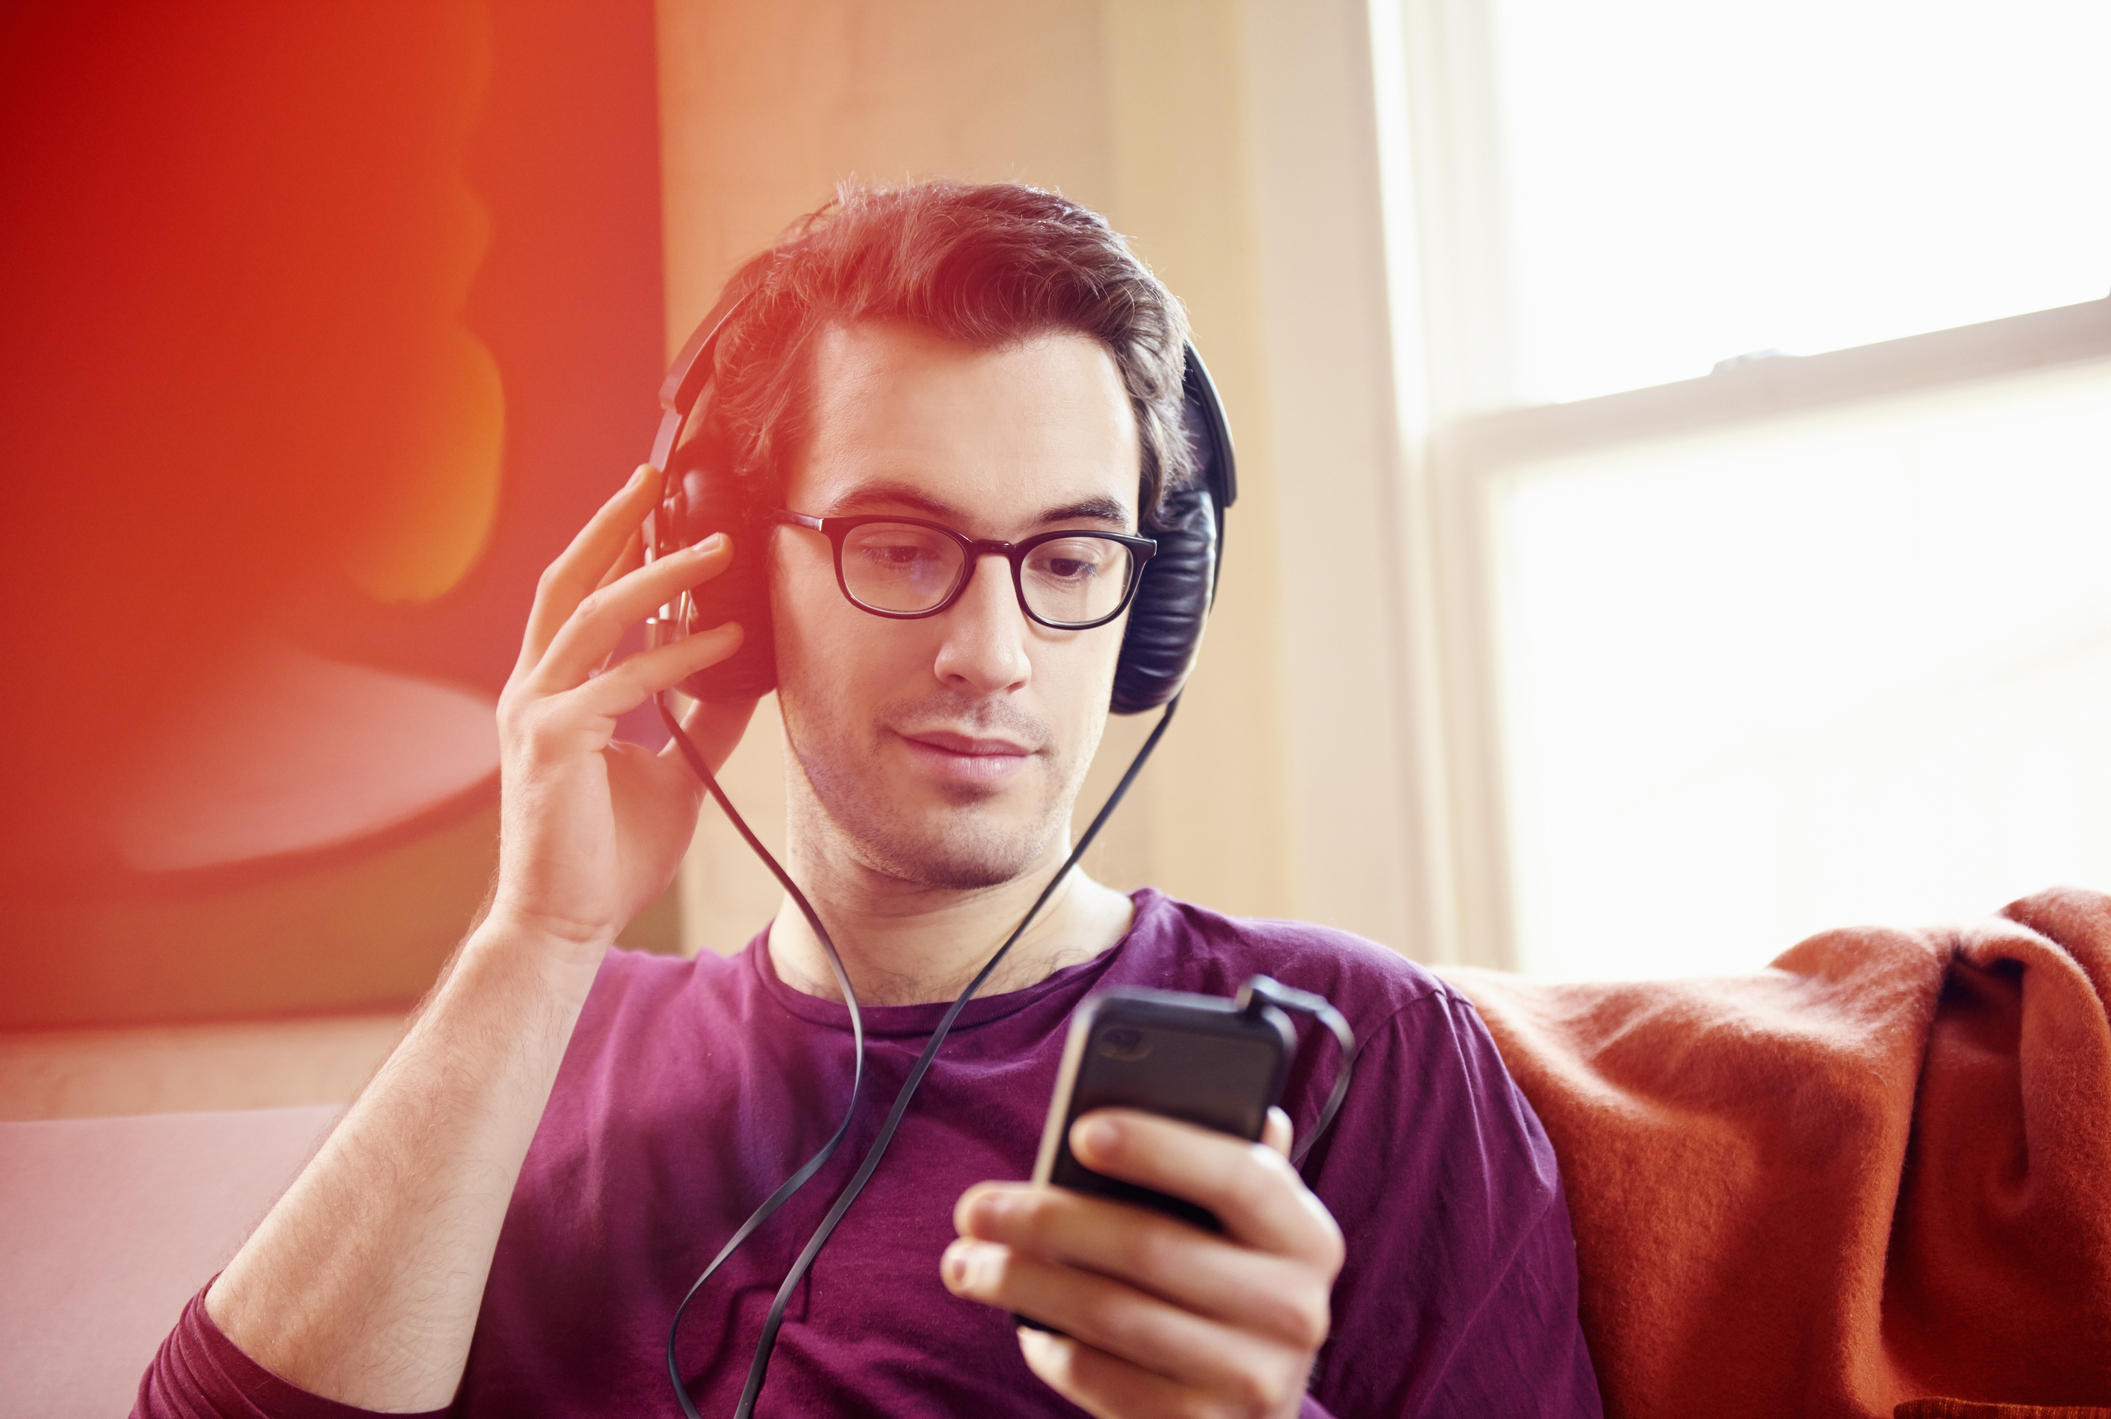 A man listening to music on his headphones